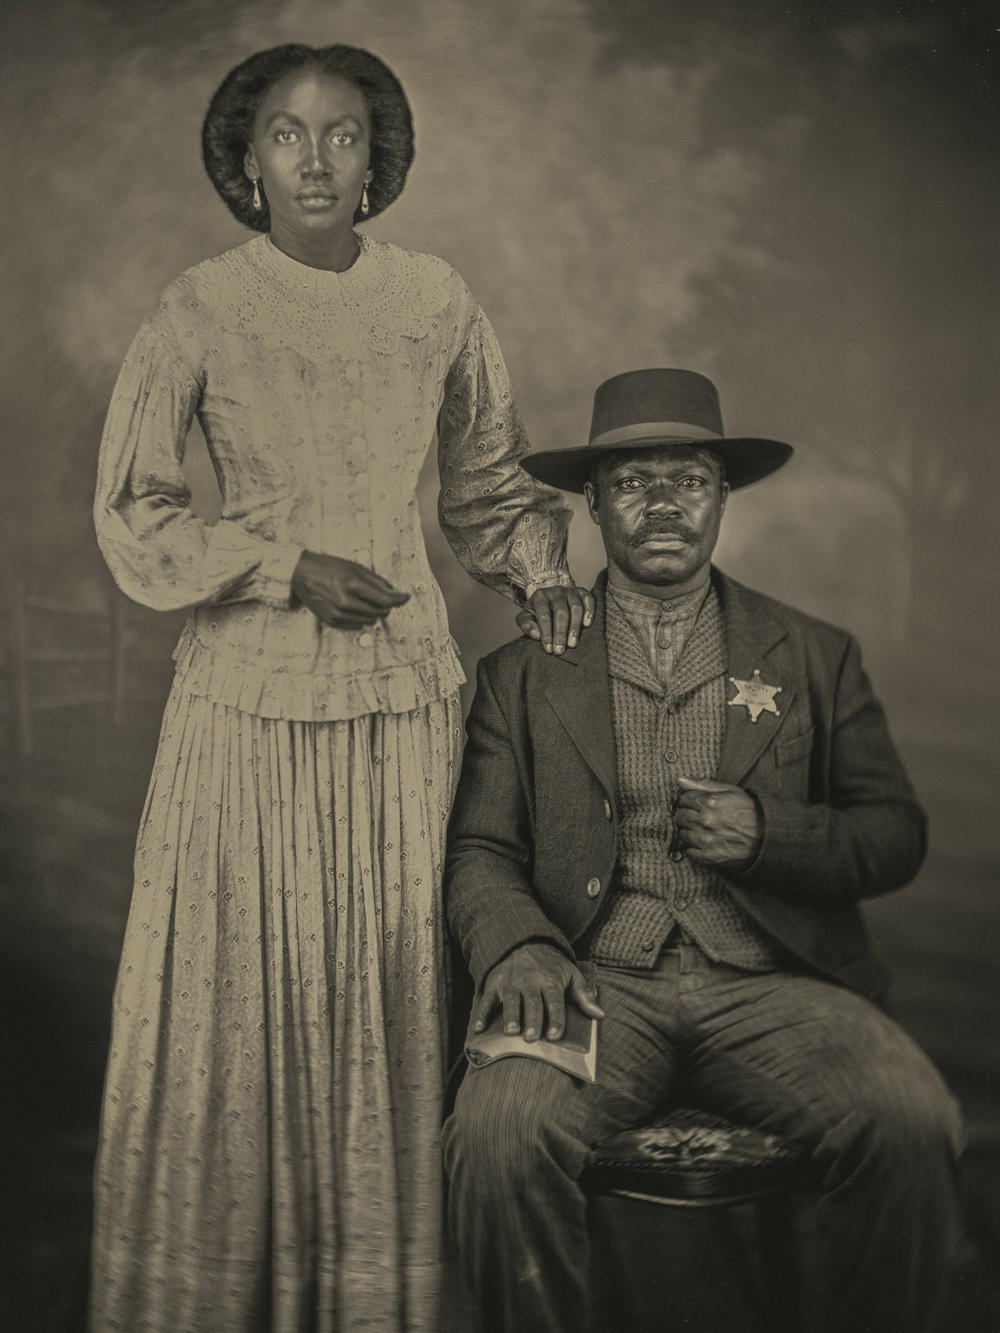 Lauren E. Banks as Jennie Reeves and David Oyelewo as Bass Reeves.